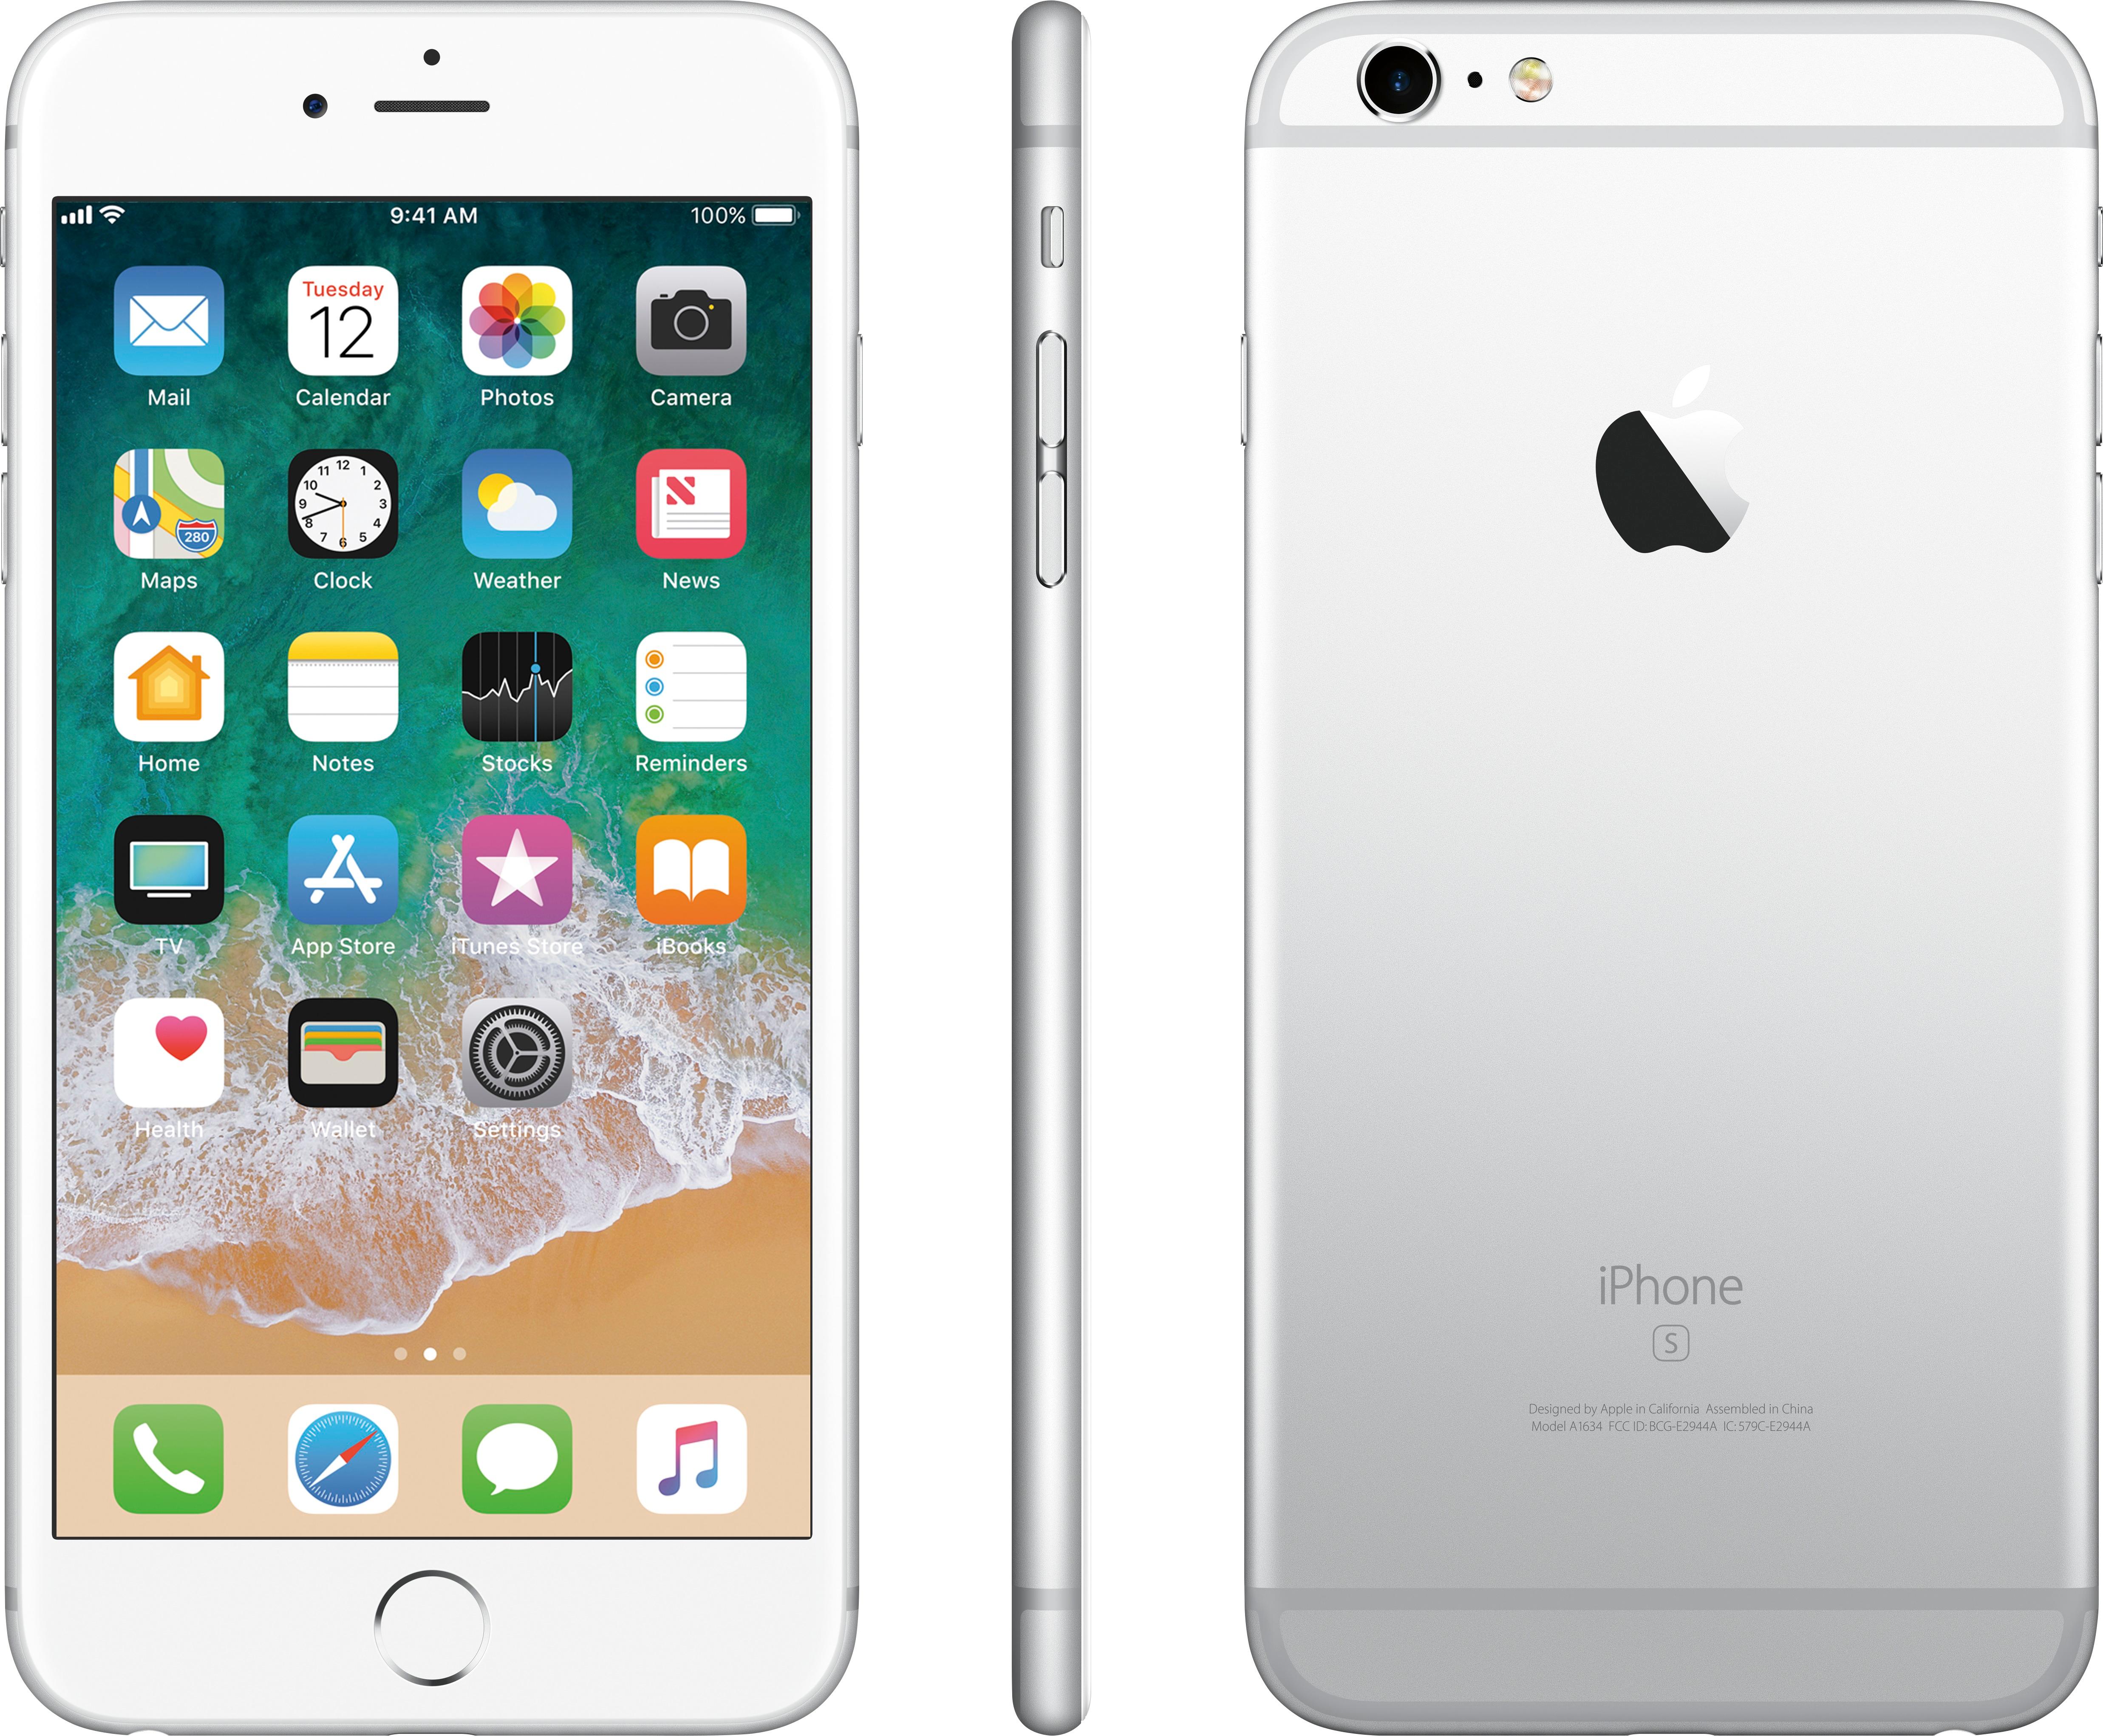 iPhone 6s and iPhone 6s Plus review roundup | iMore